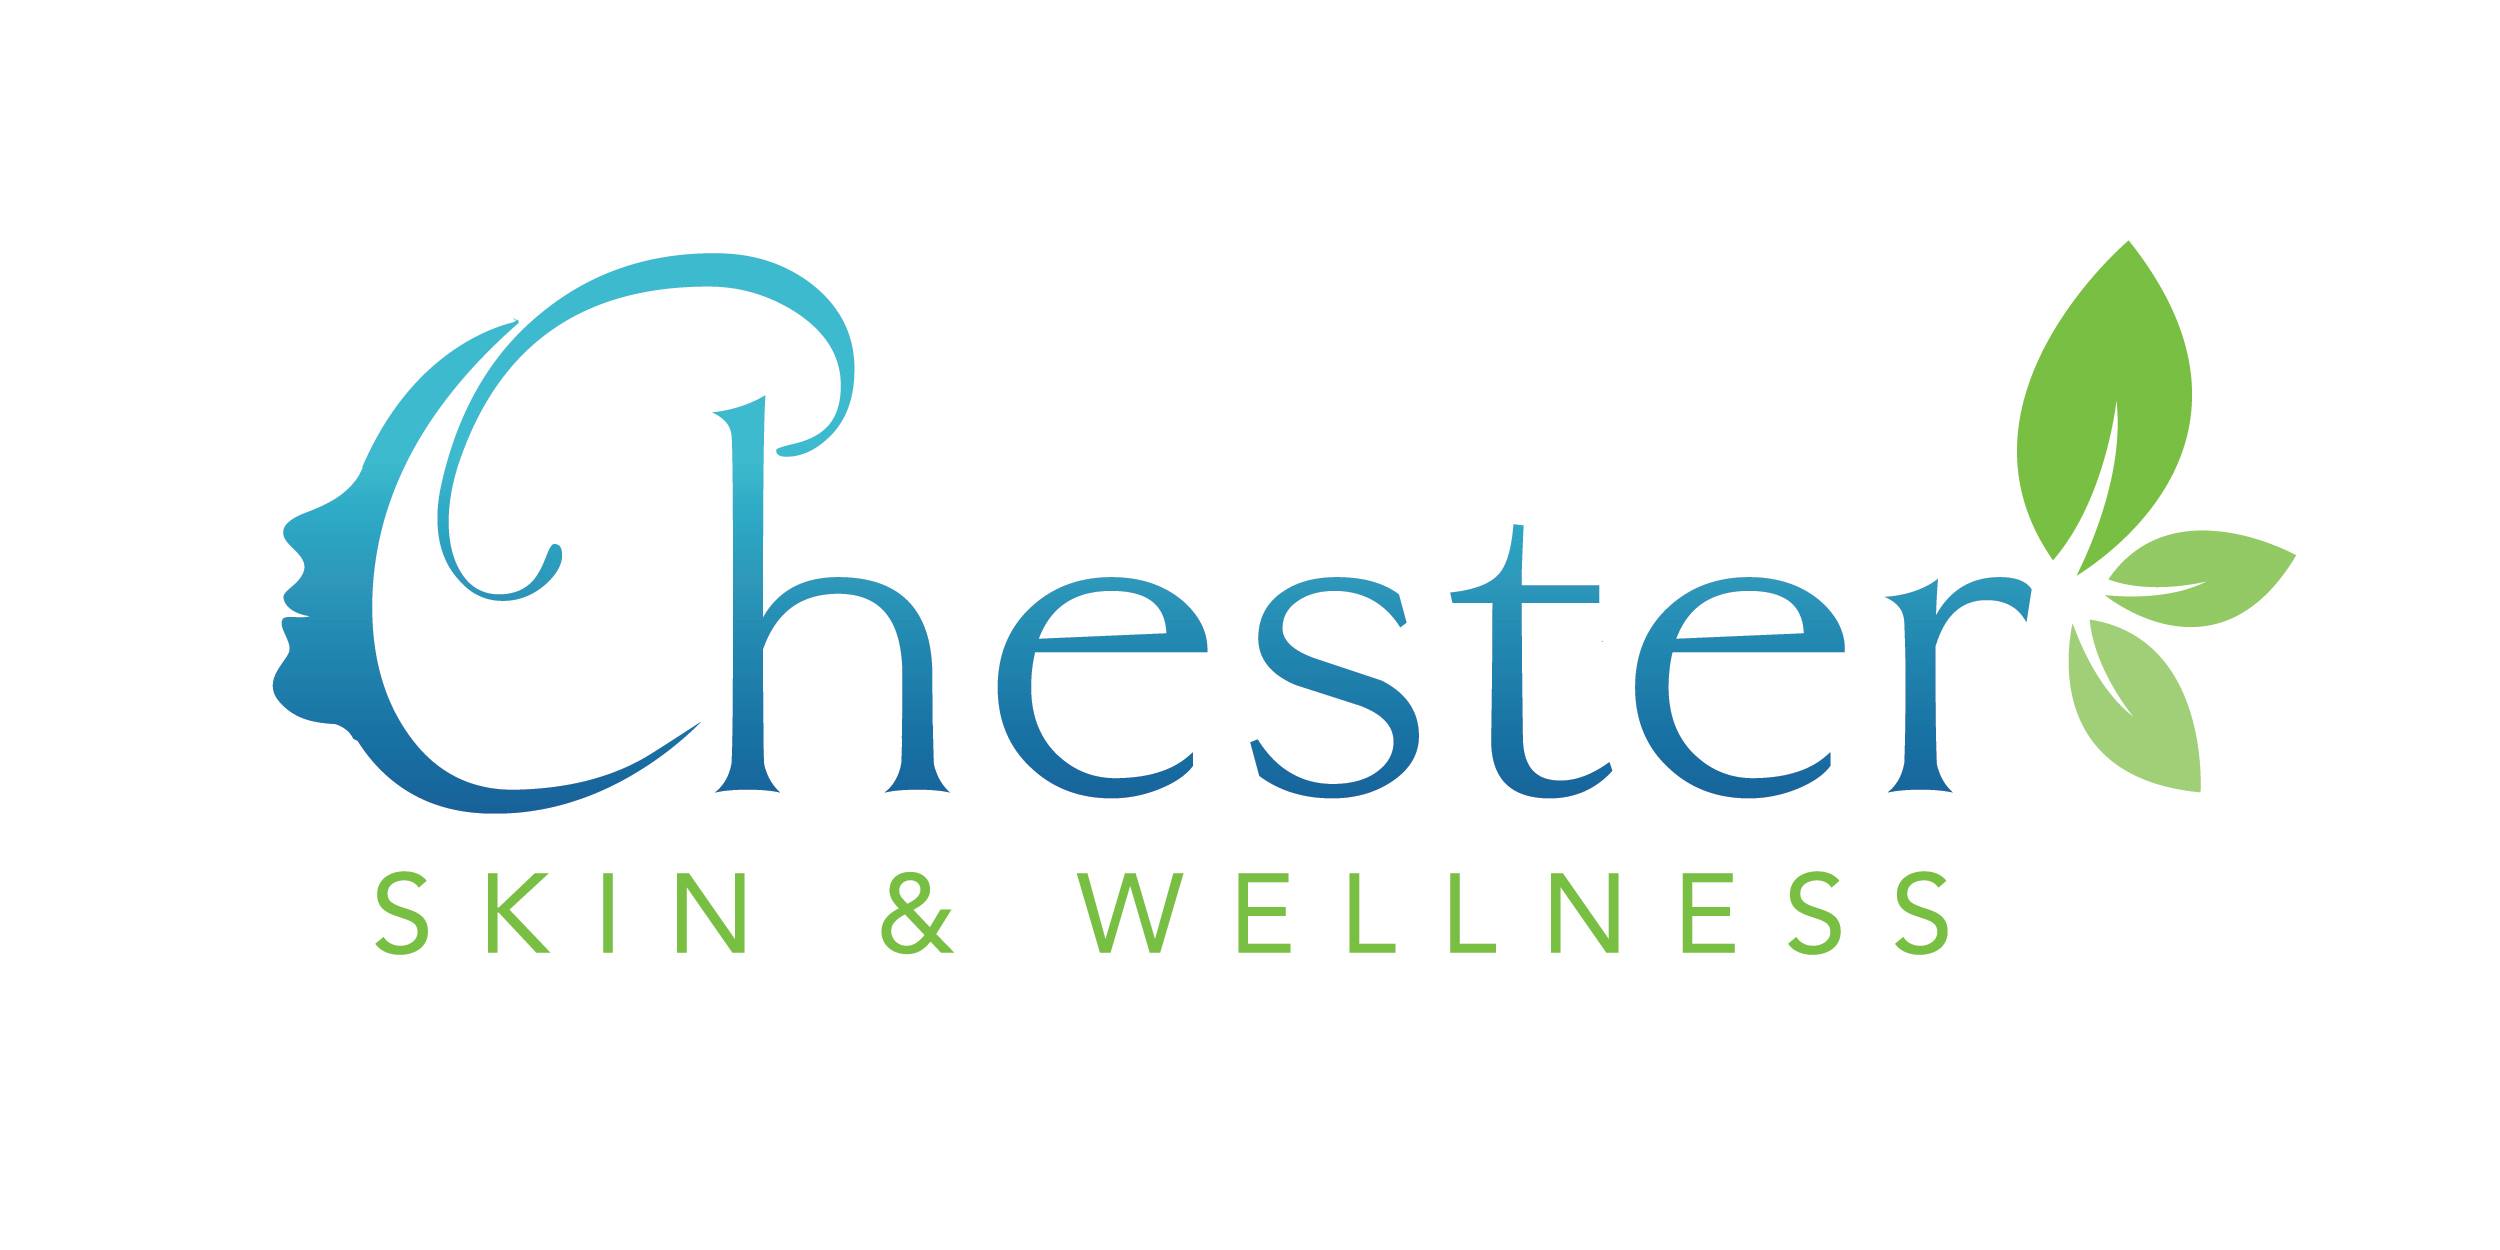 Chester Skin & Wellness Offers Rejuvenation Services